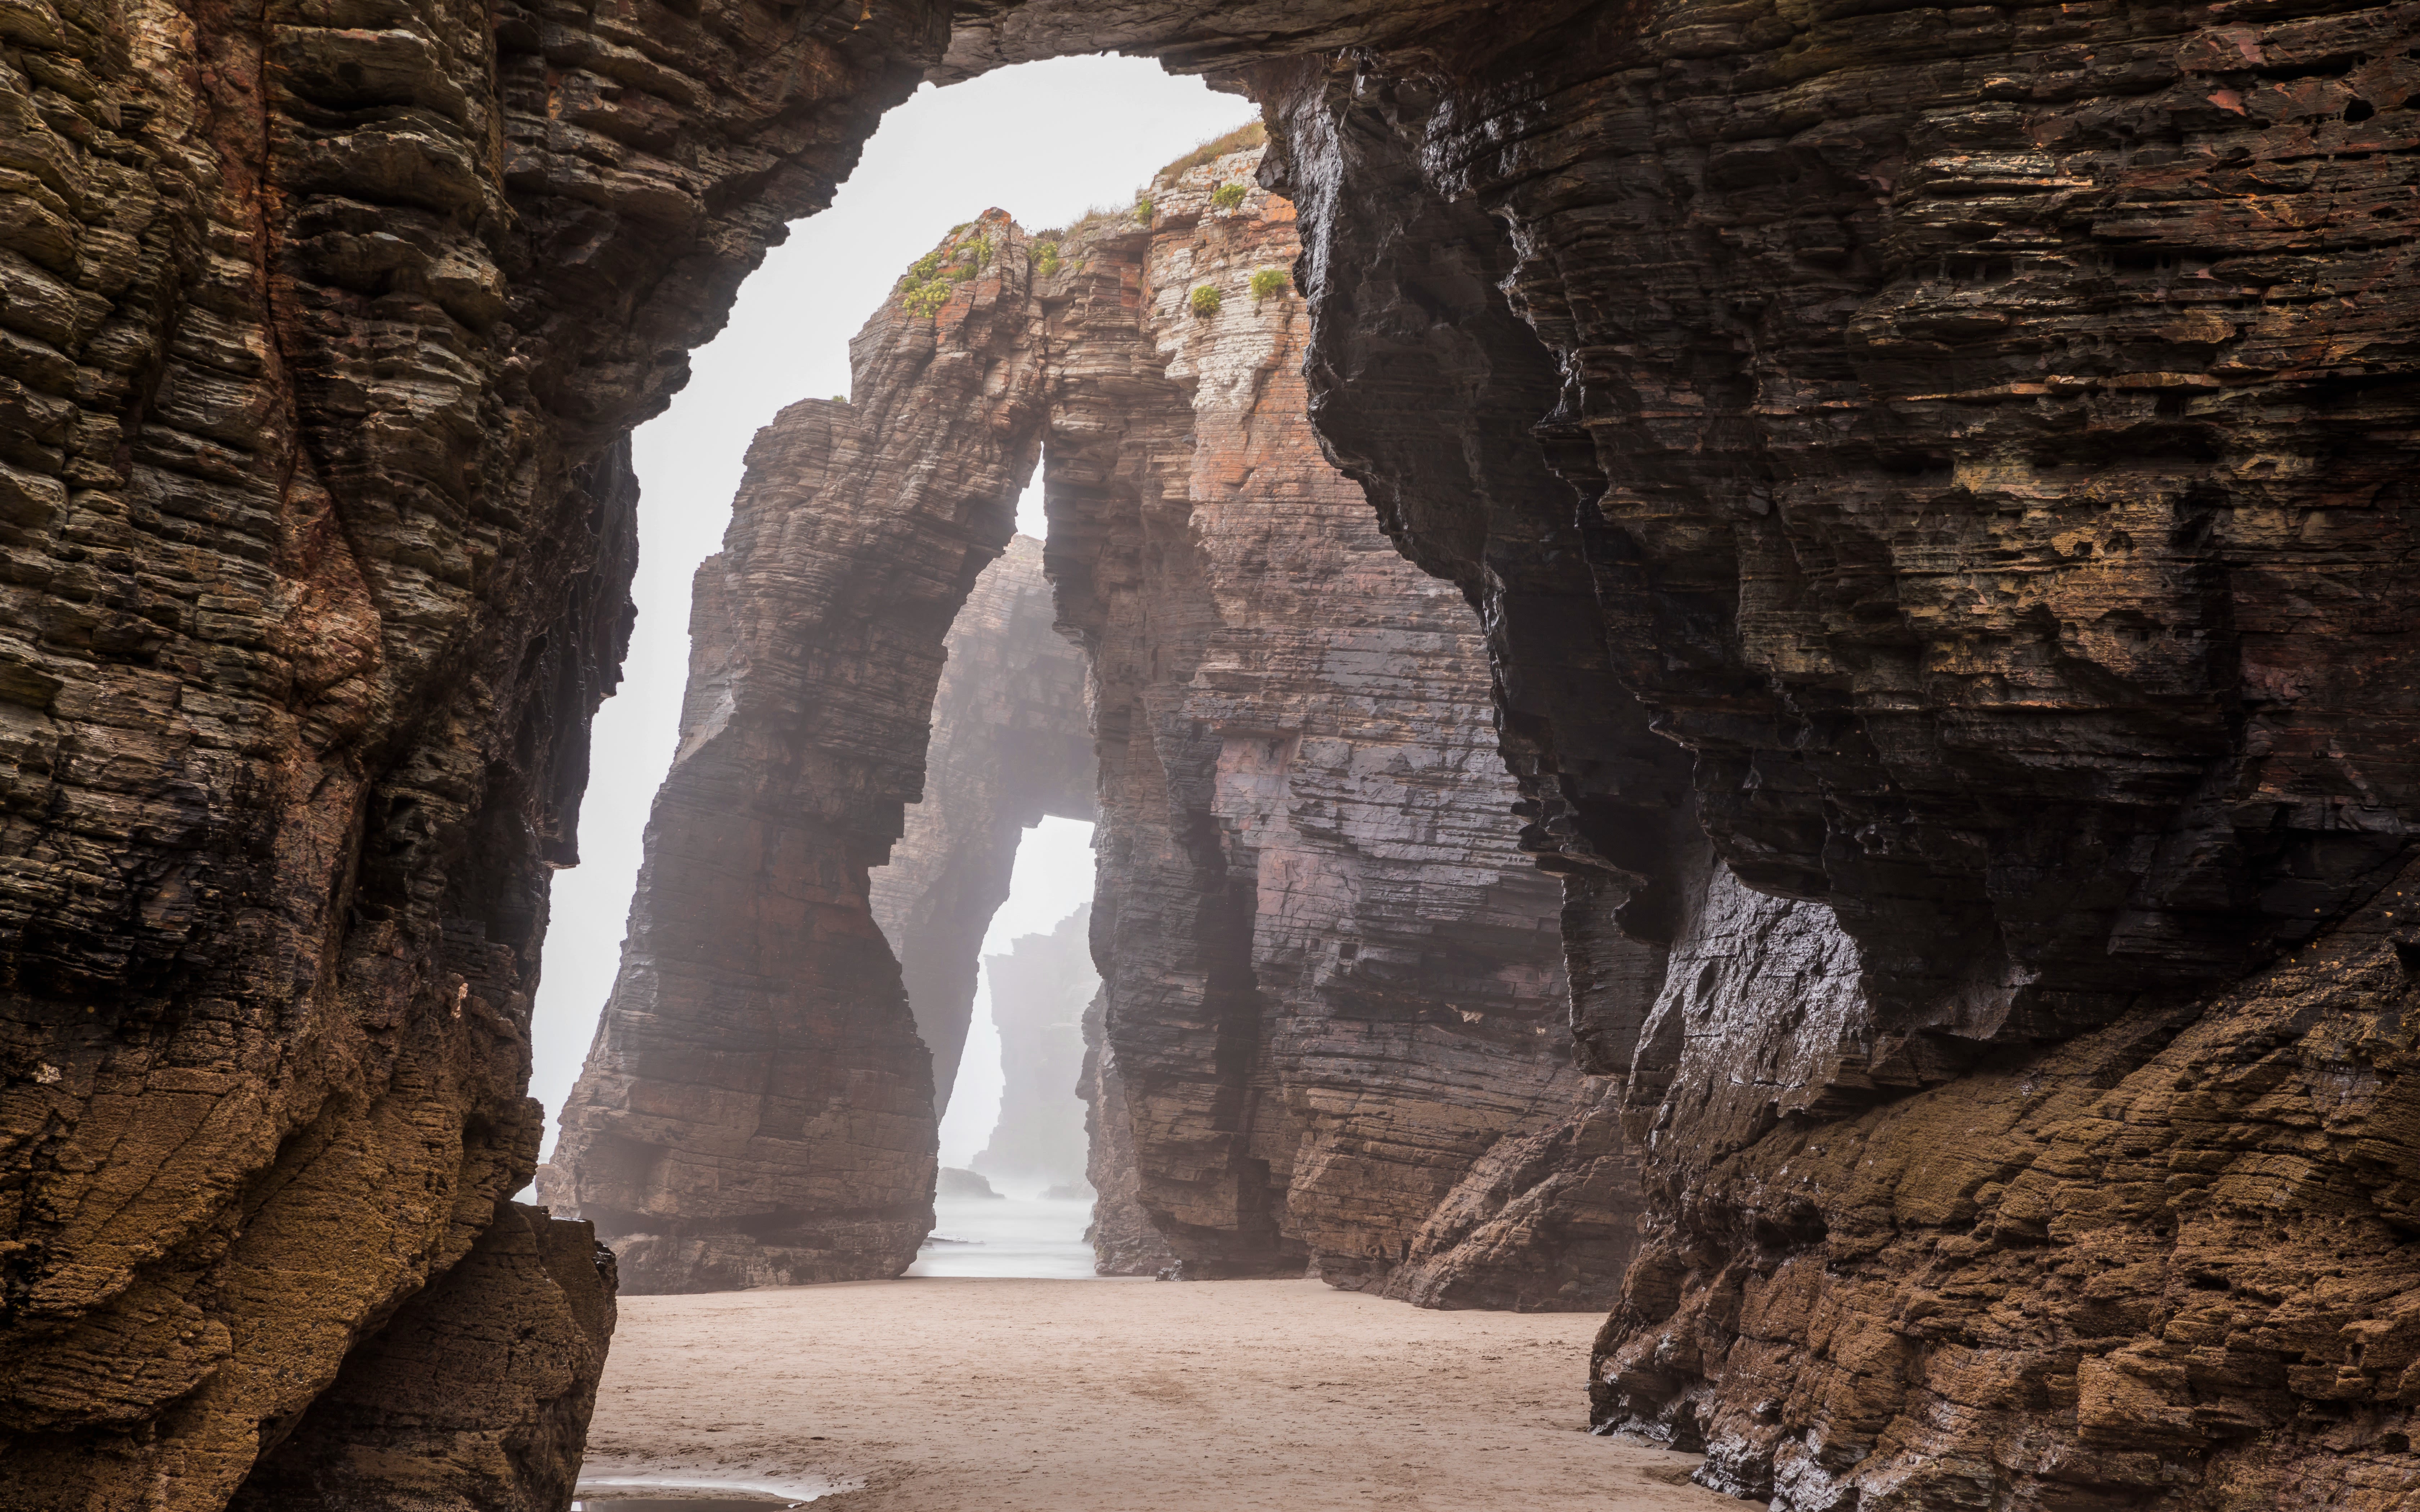 Image of the naturally formed archways on the beach in Praia As Catedrais.